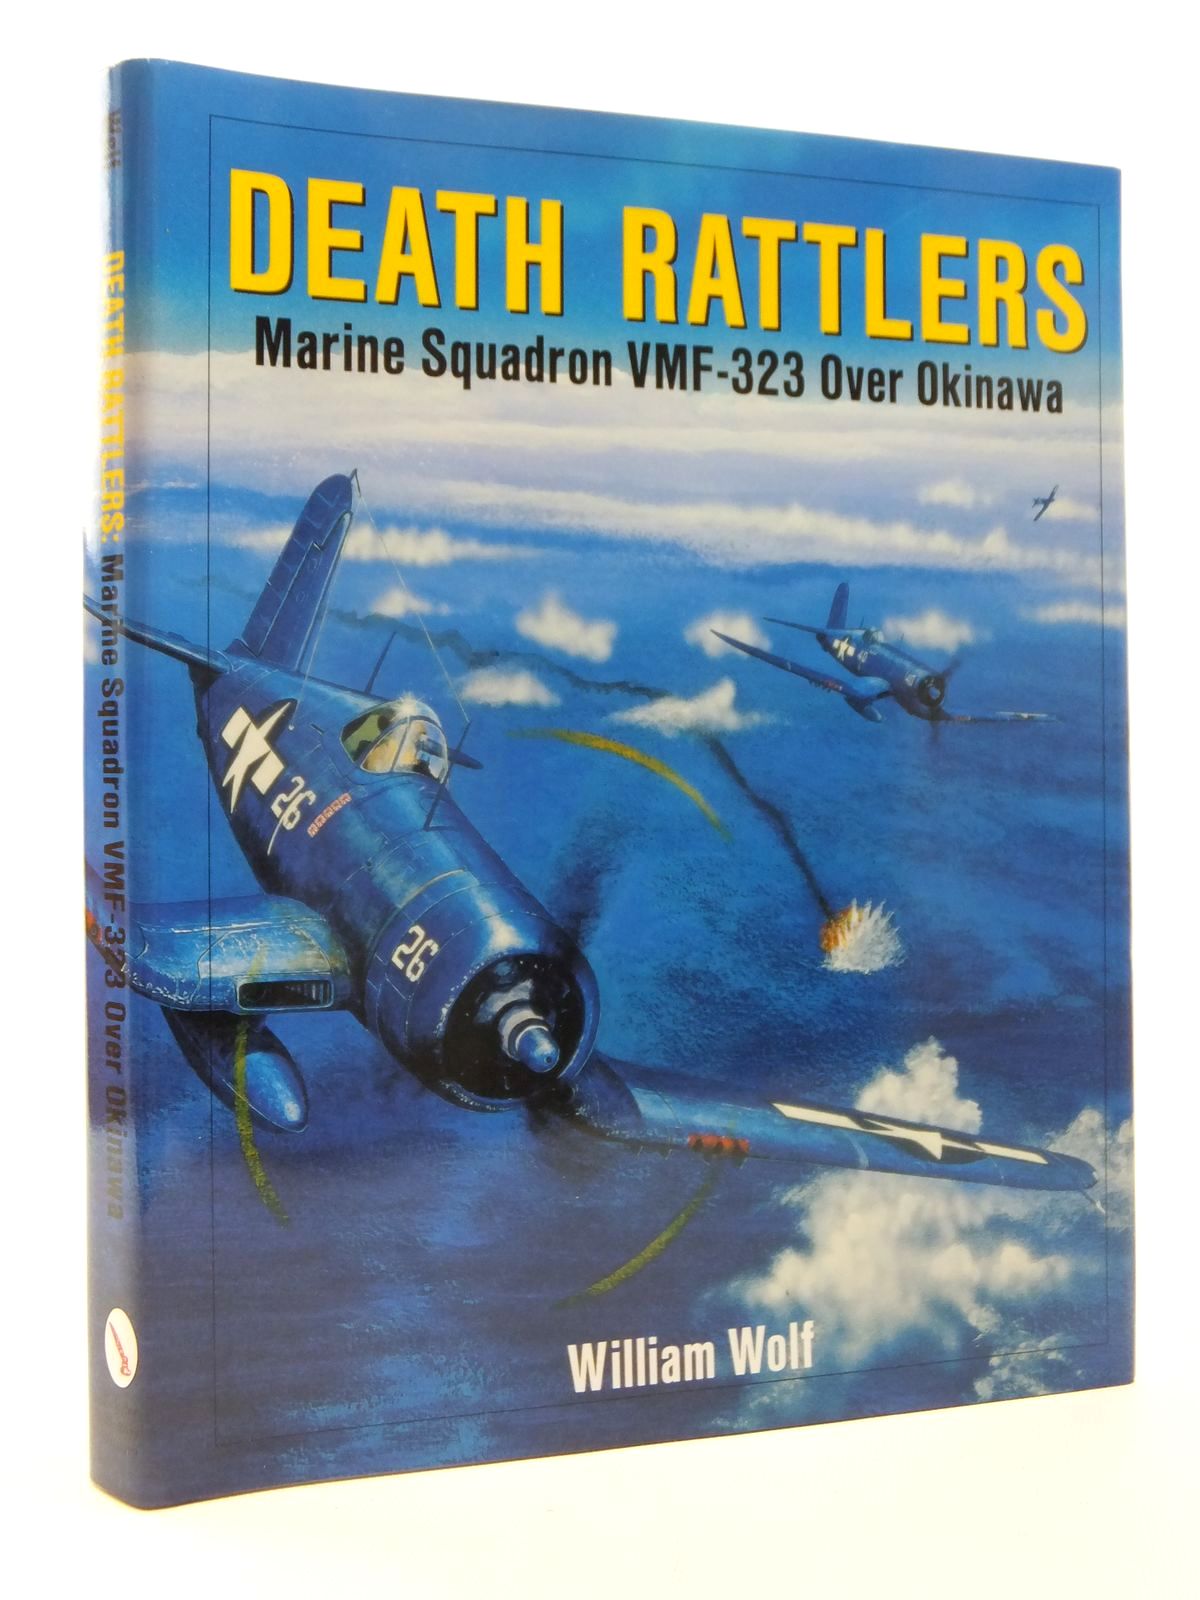 Photo of DEATH RATTLERS MARINE SQUADRON VMF-323 OVER OKINAWA written by Wolf, William published by Schiffer Military History (STOCK CODE: 1610021)  for sale by Stella & Rose's Books